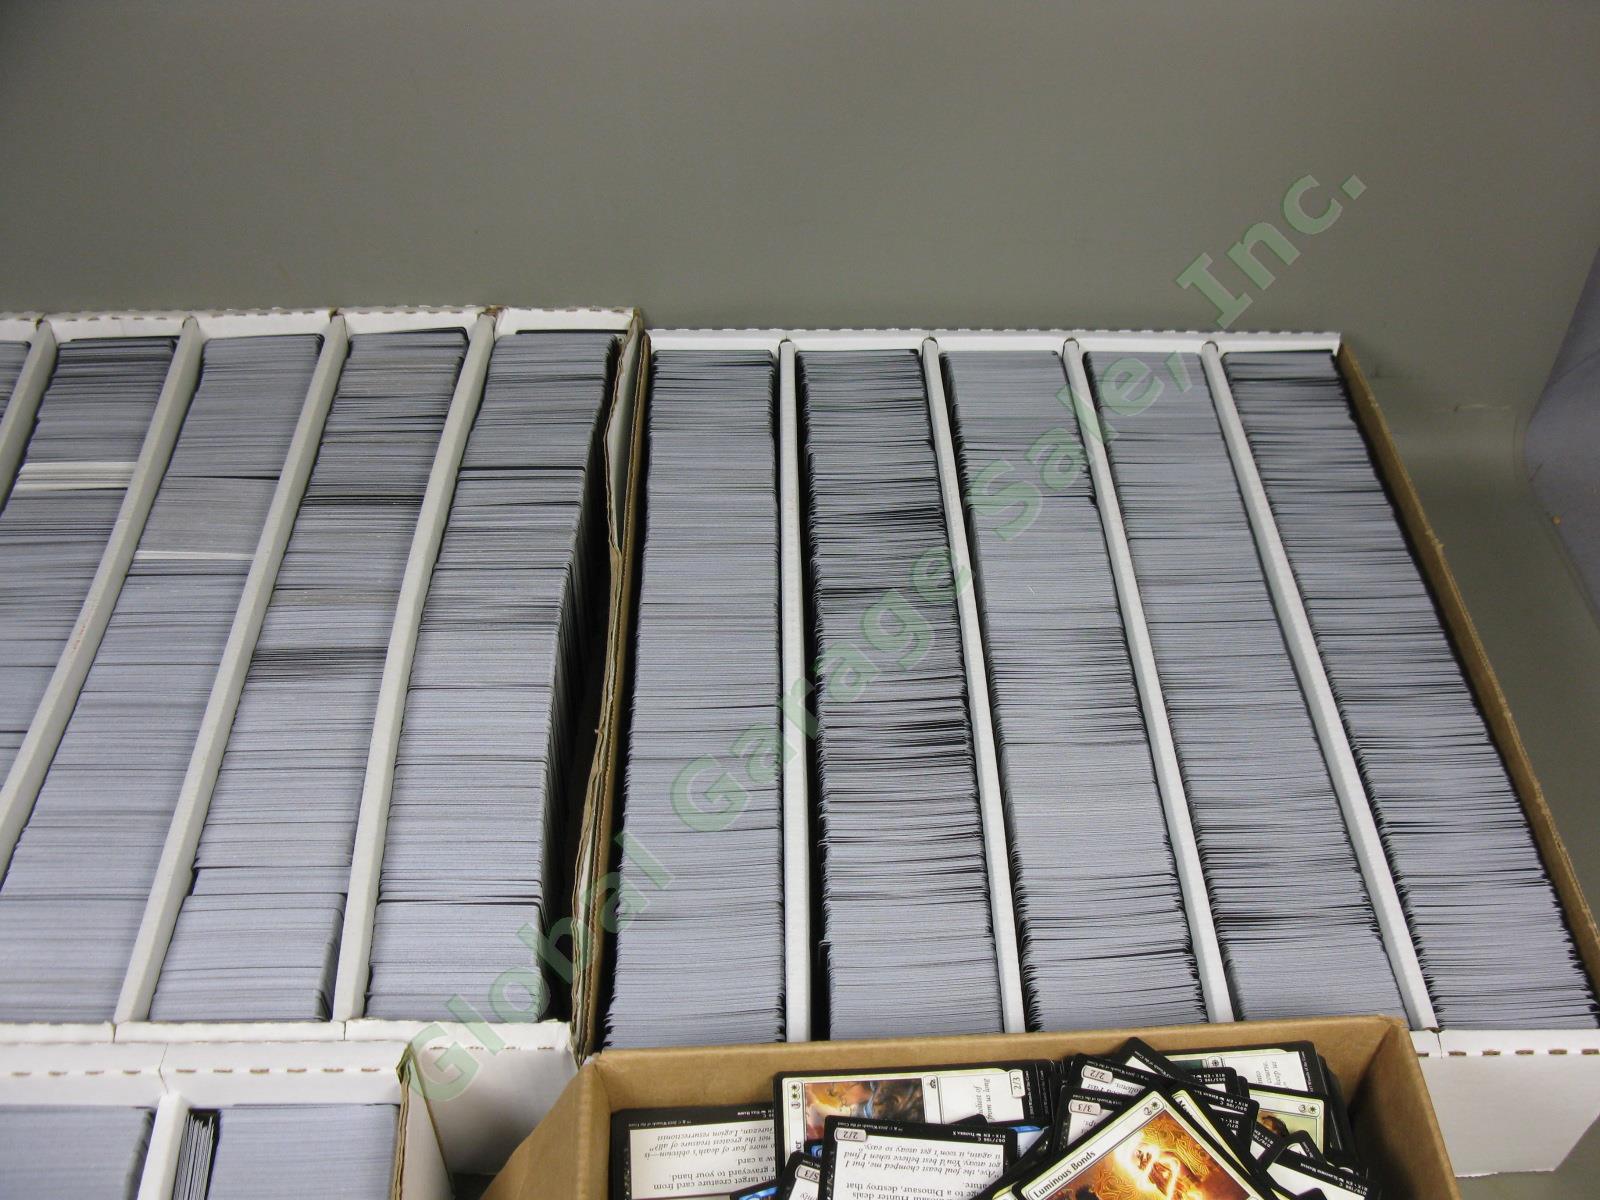 HUGE LOT ~22,000 Magic The Gathering MTG Cards Collection BIGGEST ON EBAY? Rare? 5